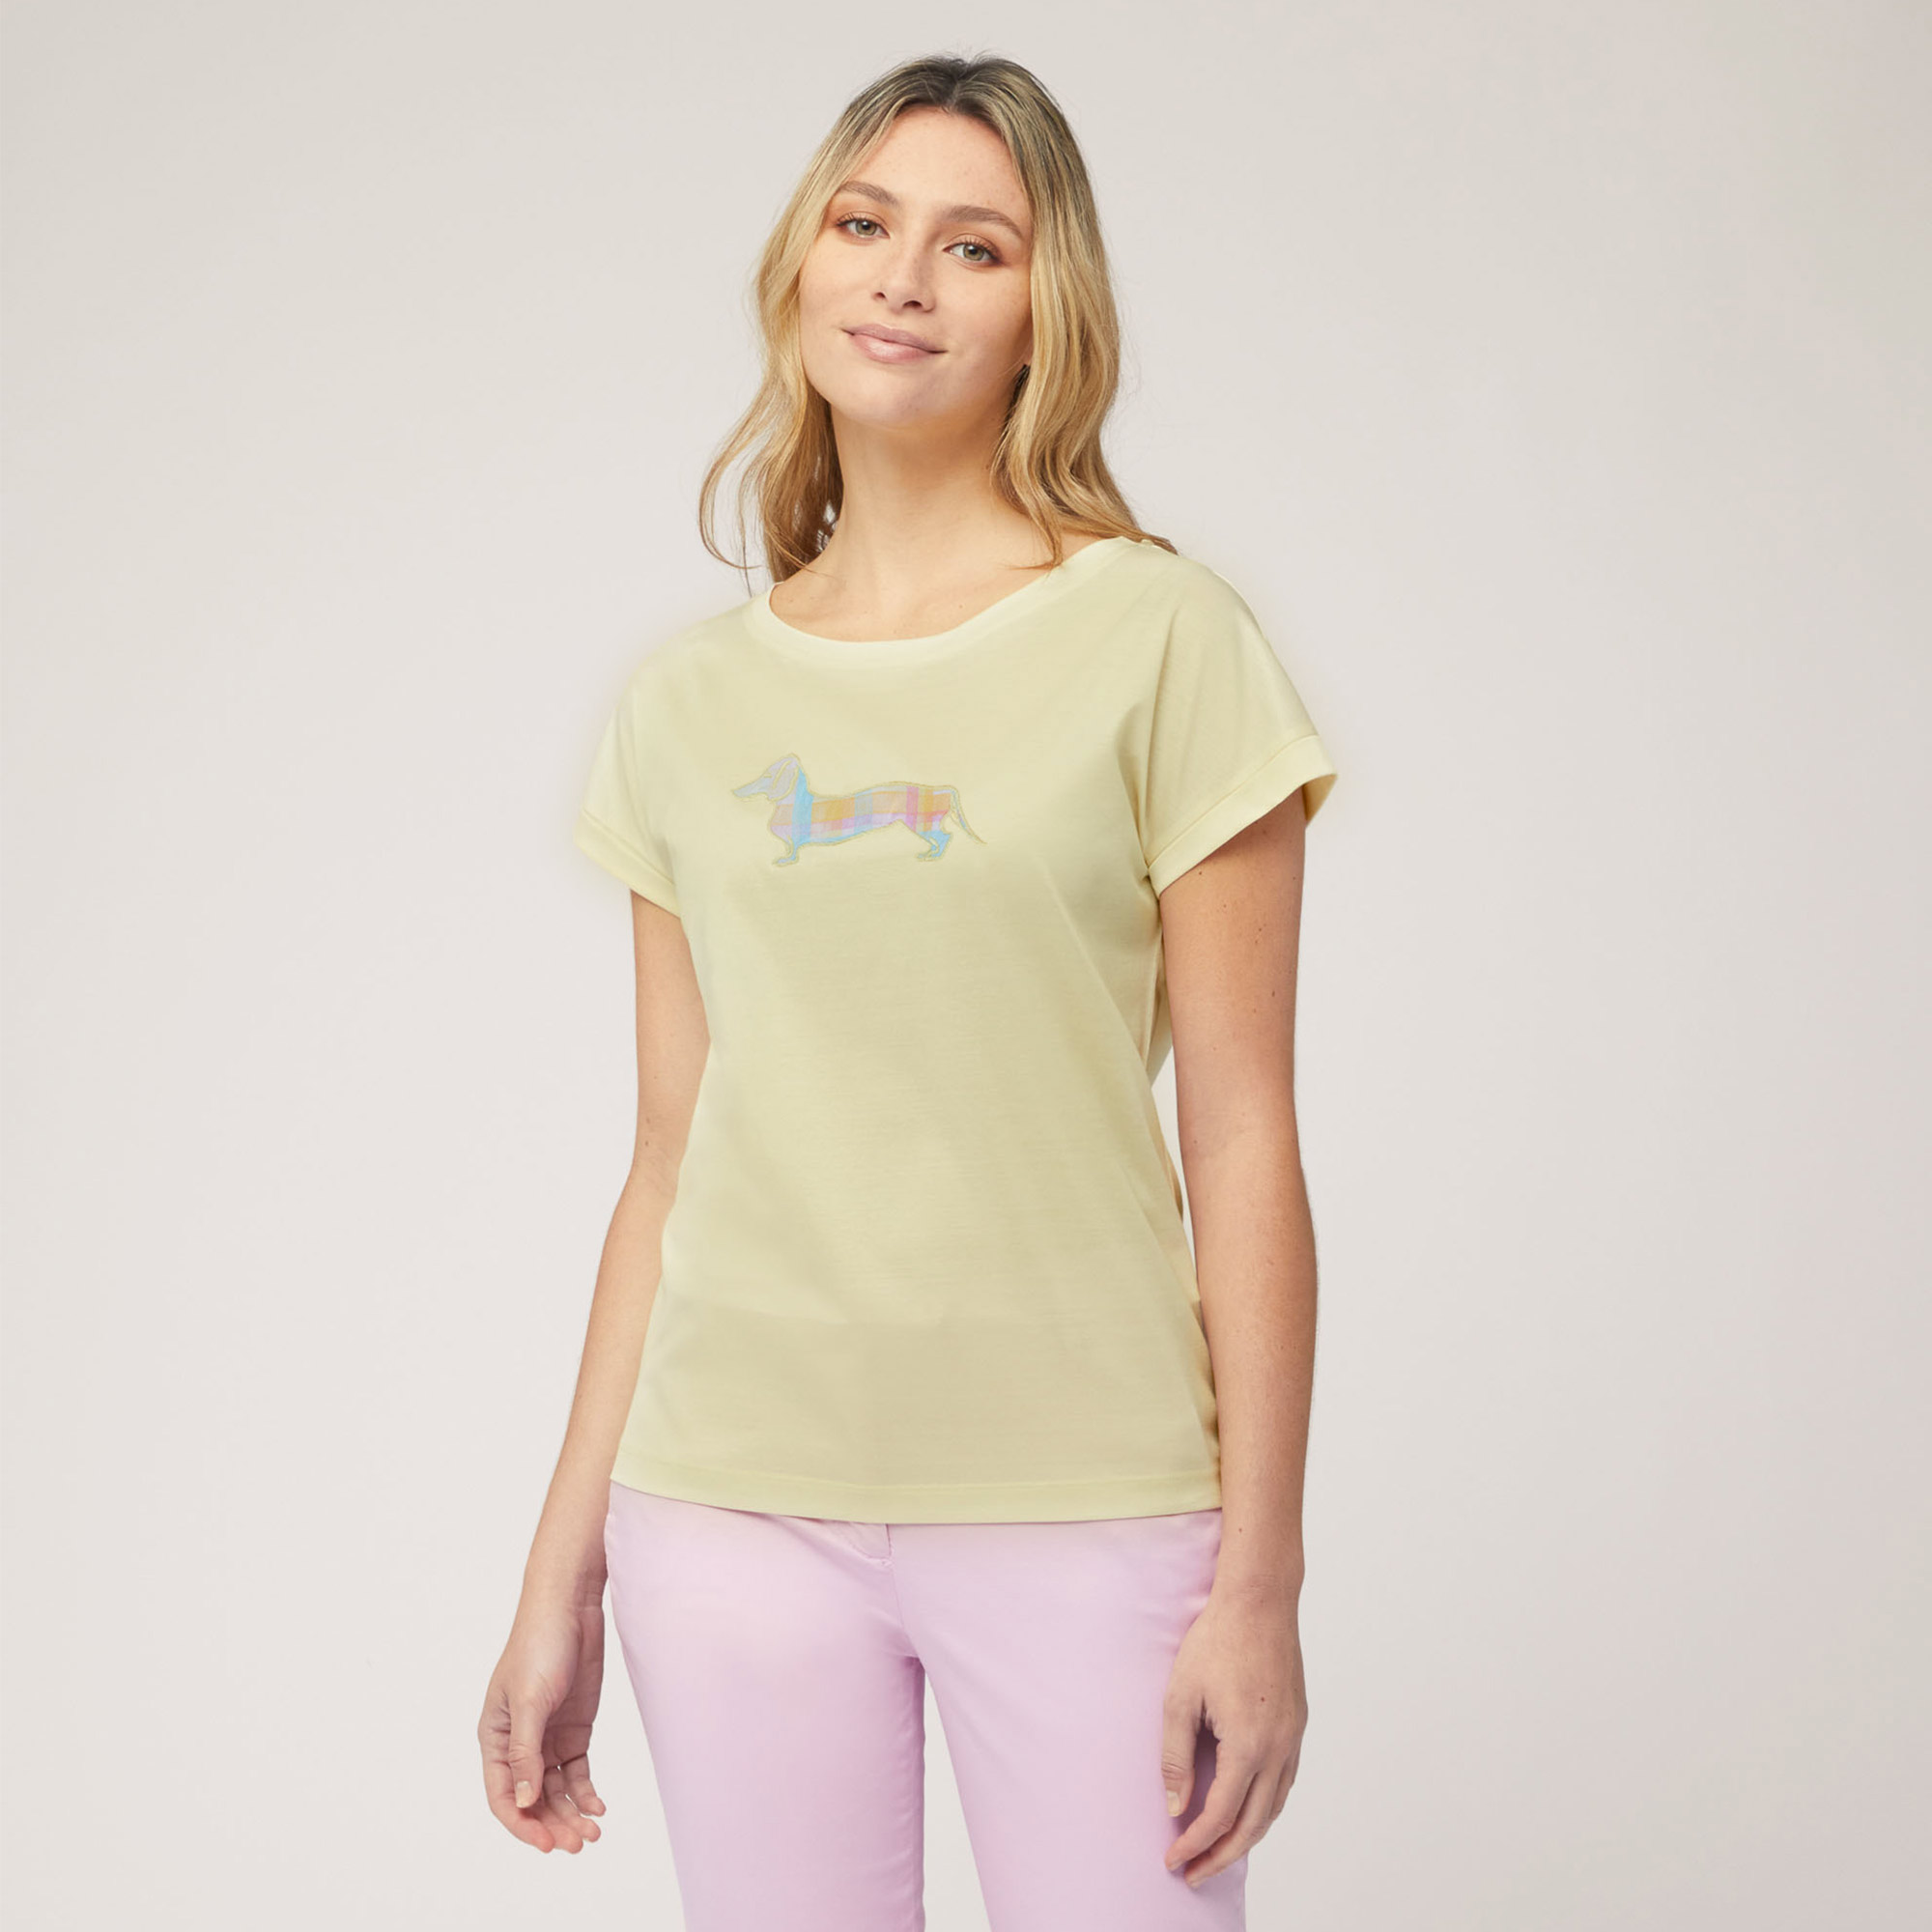 Cotton T-Shirt with Dachshund, Light Yellow, large image number 3